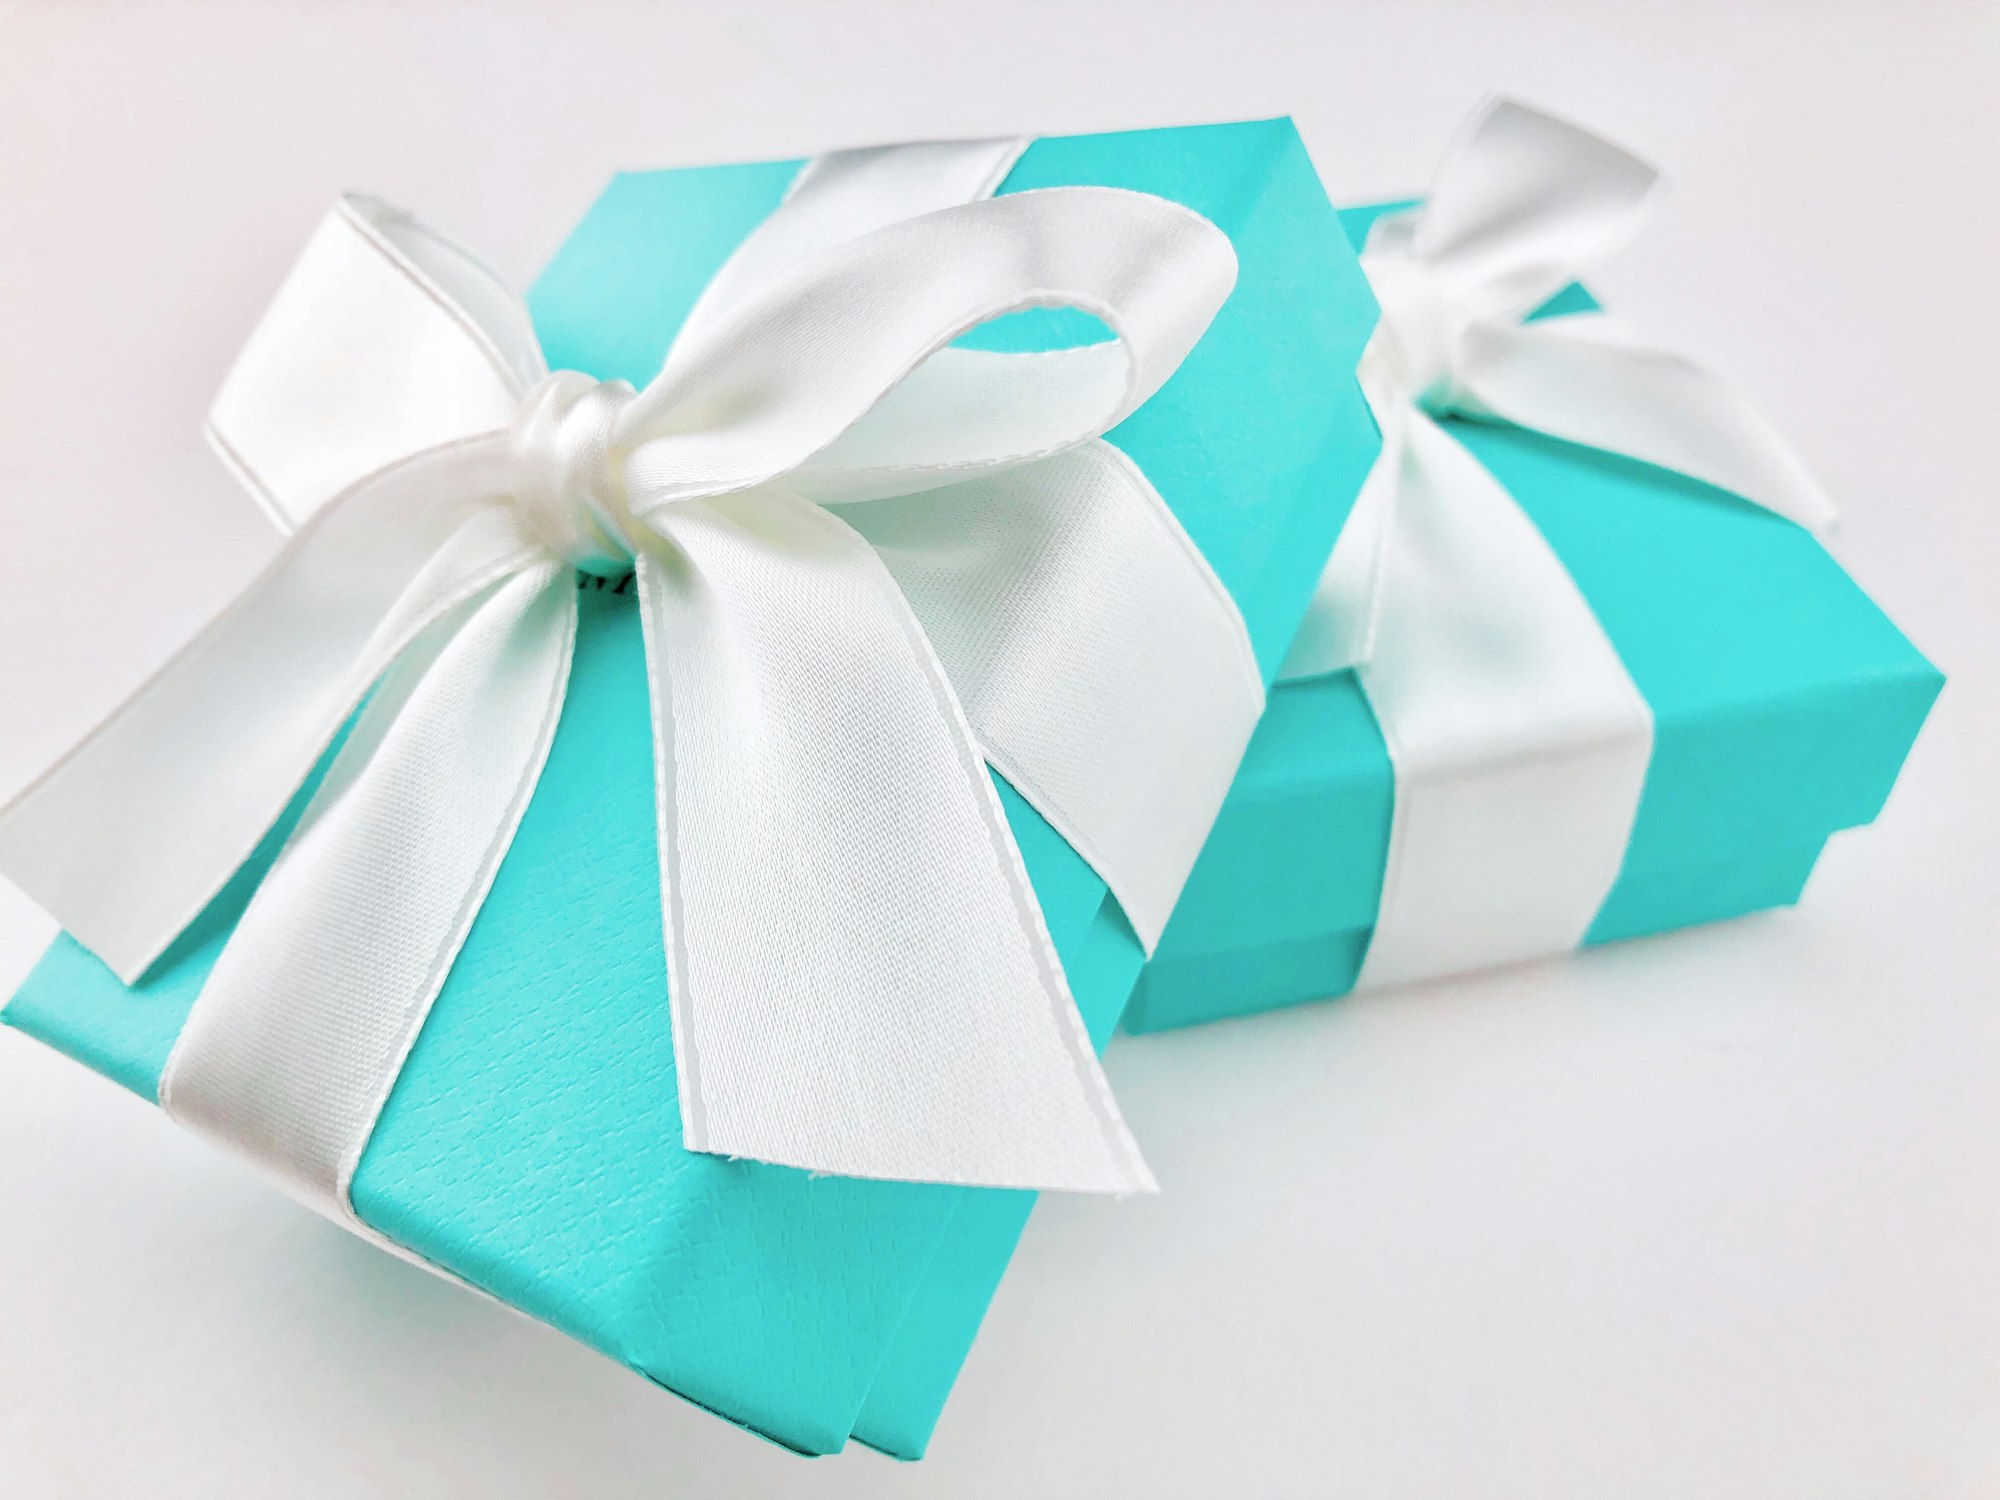 Close up of gifts wrapped in iconic blue boxes with white satin ribbons.